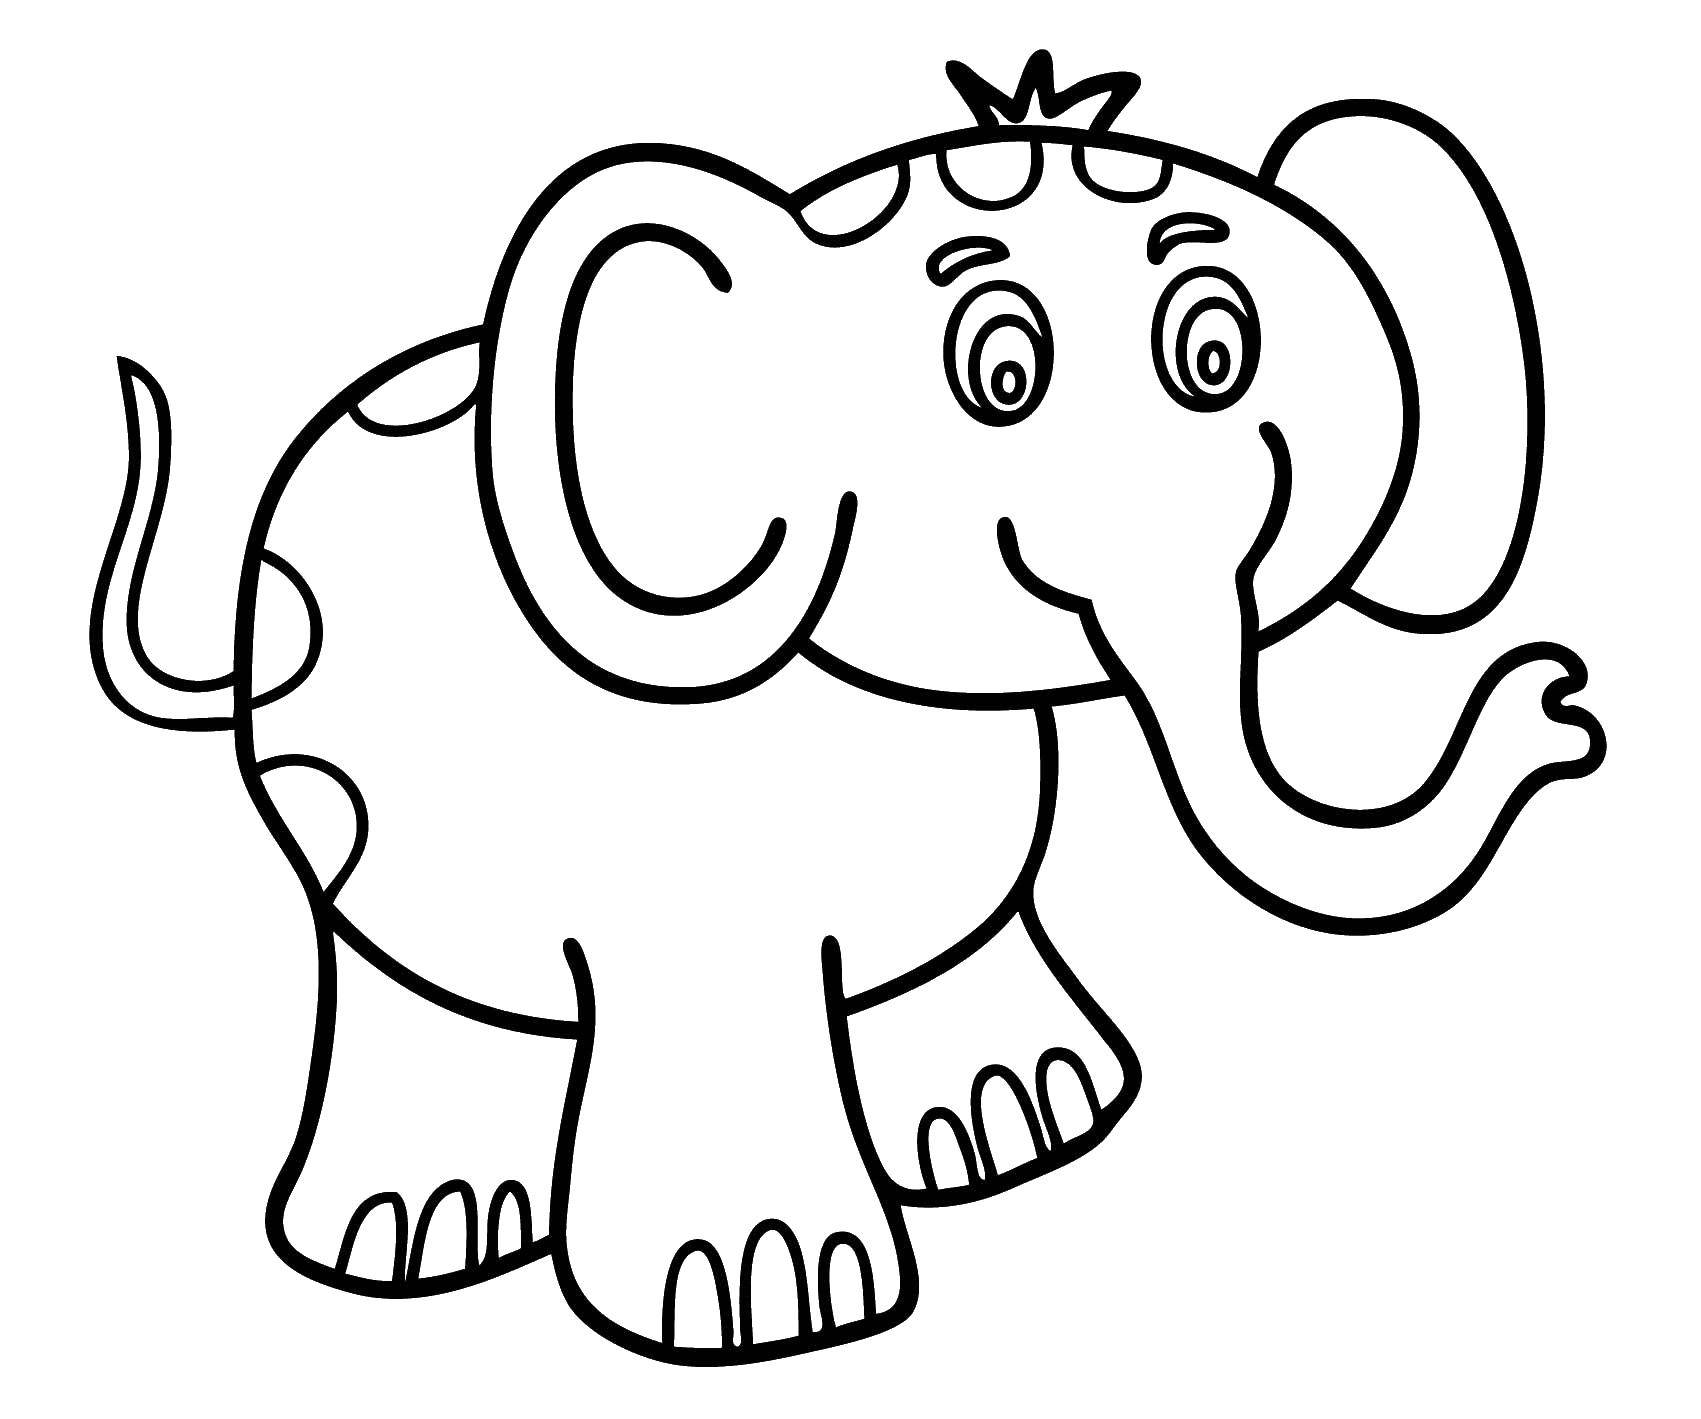 Coloring Elephant. Category Coloring pages for kids. Tags:  elephant, elephant.